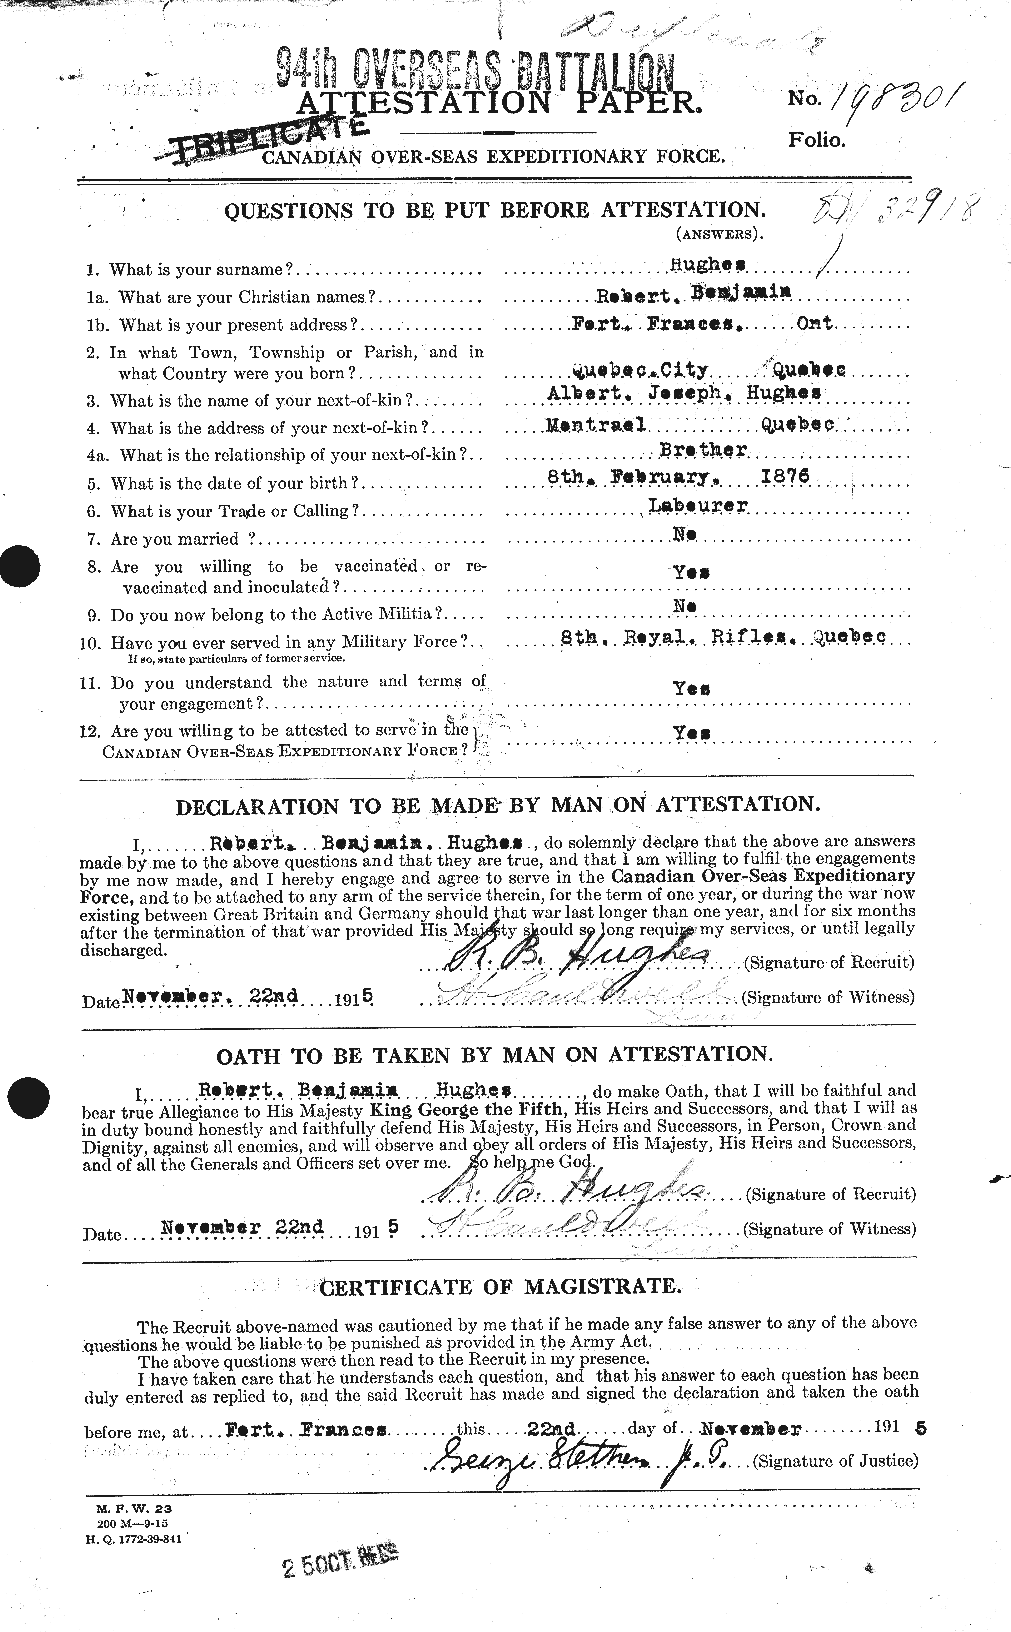 Personnel Records of the First World War - CEF 406607a